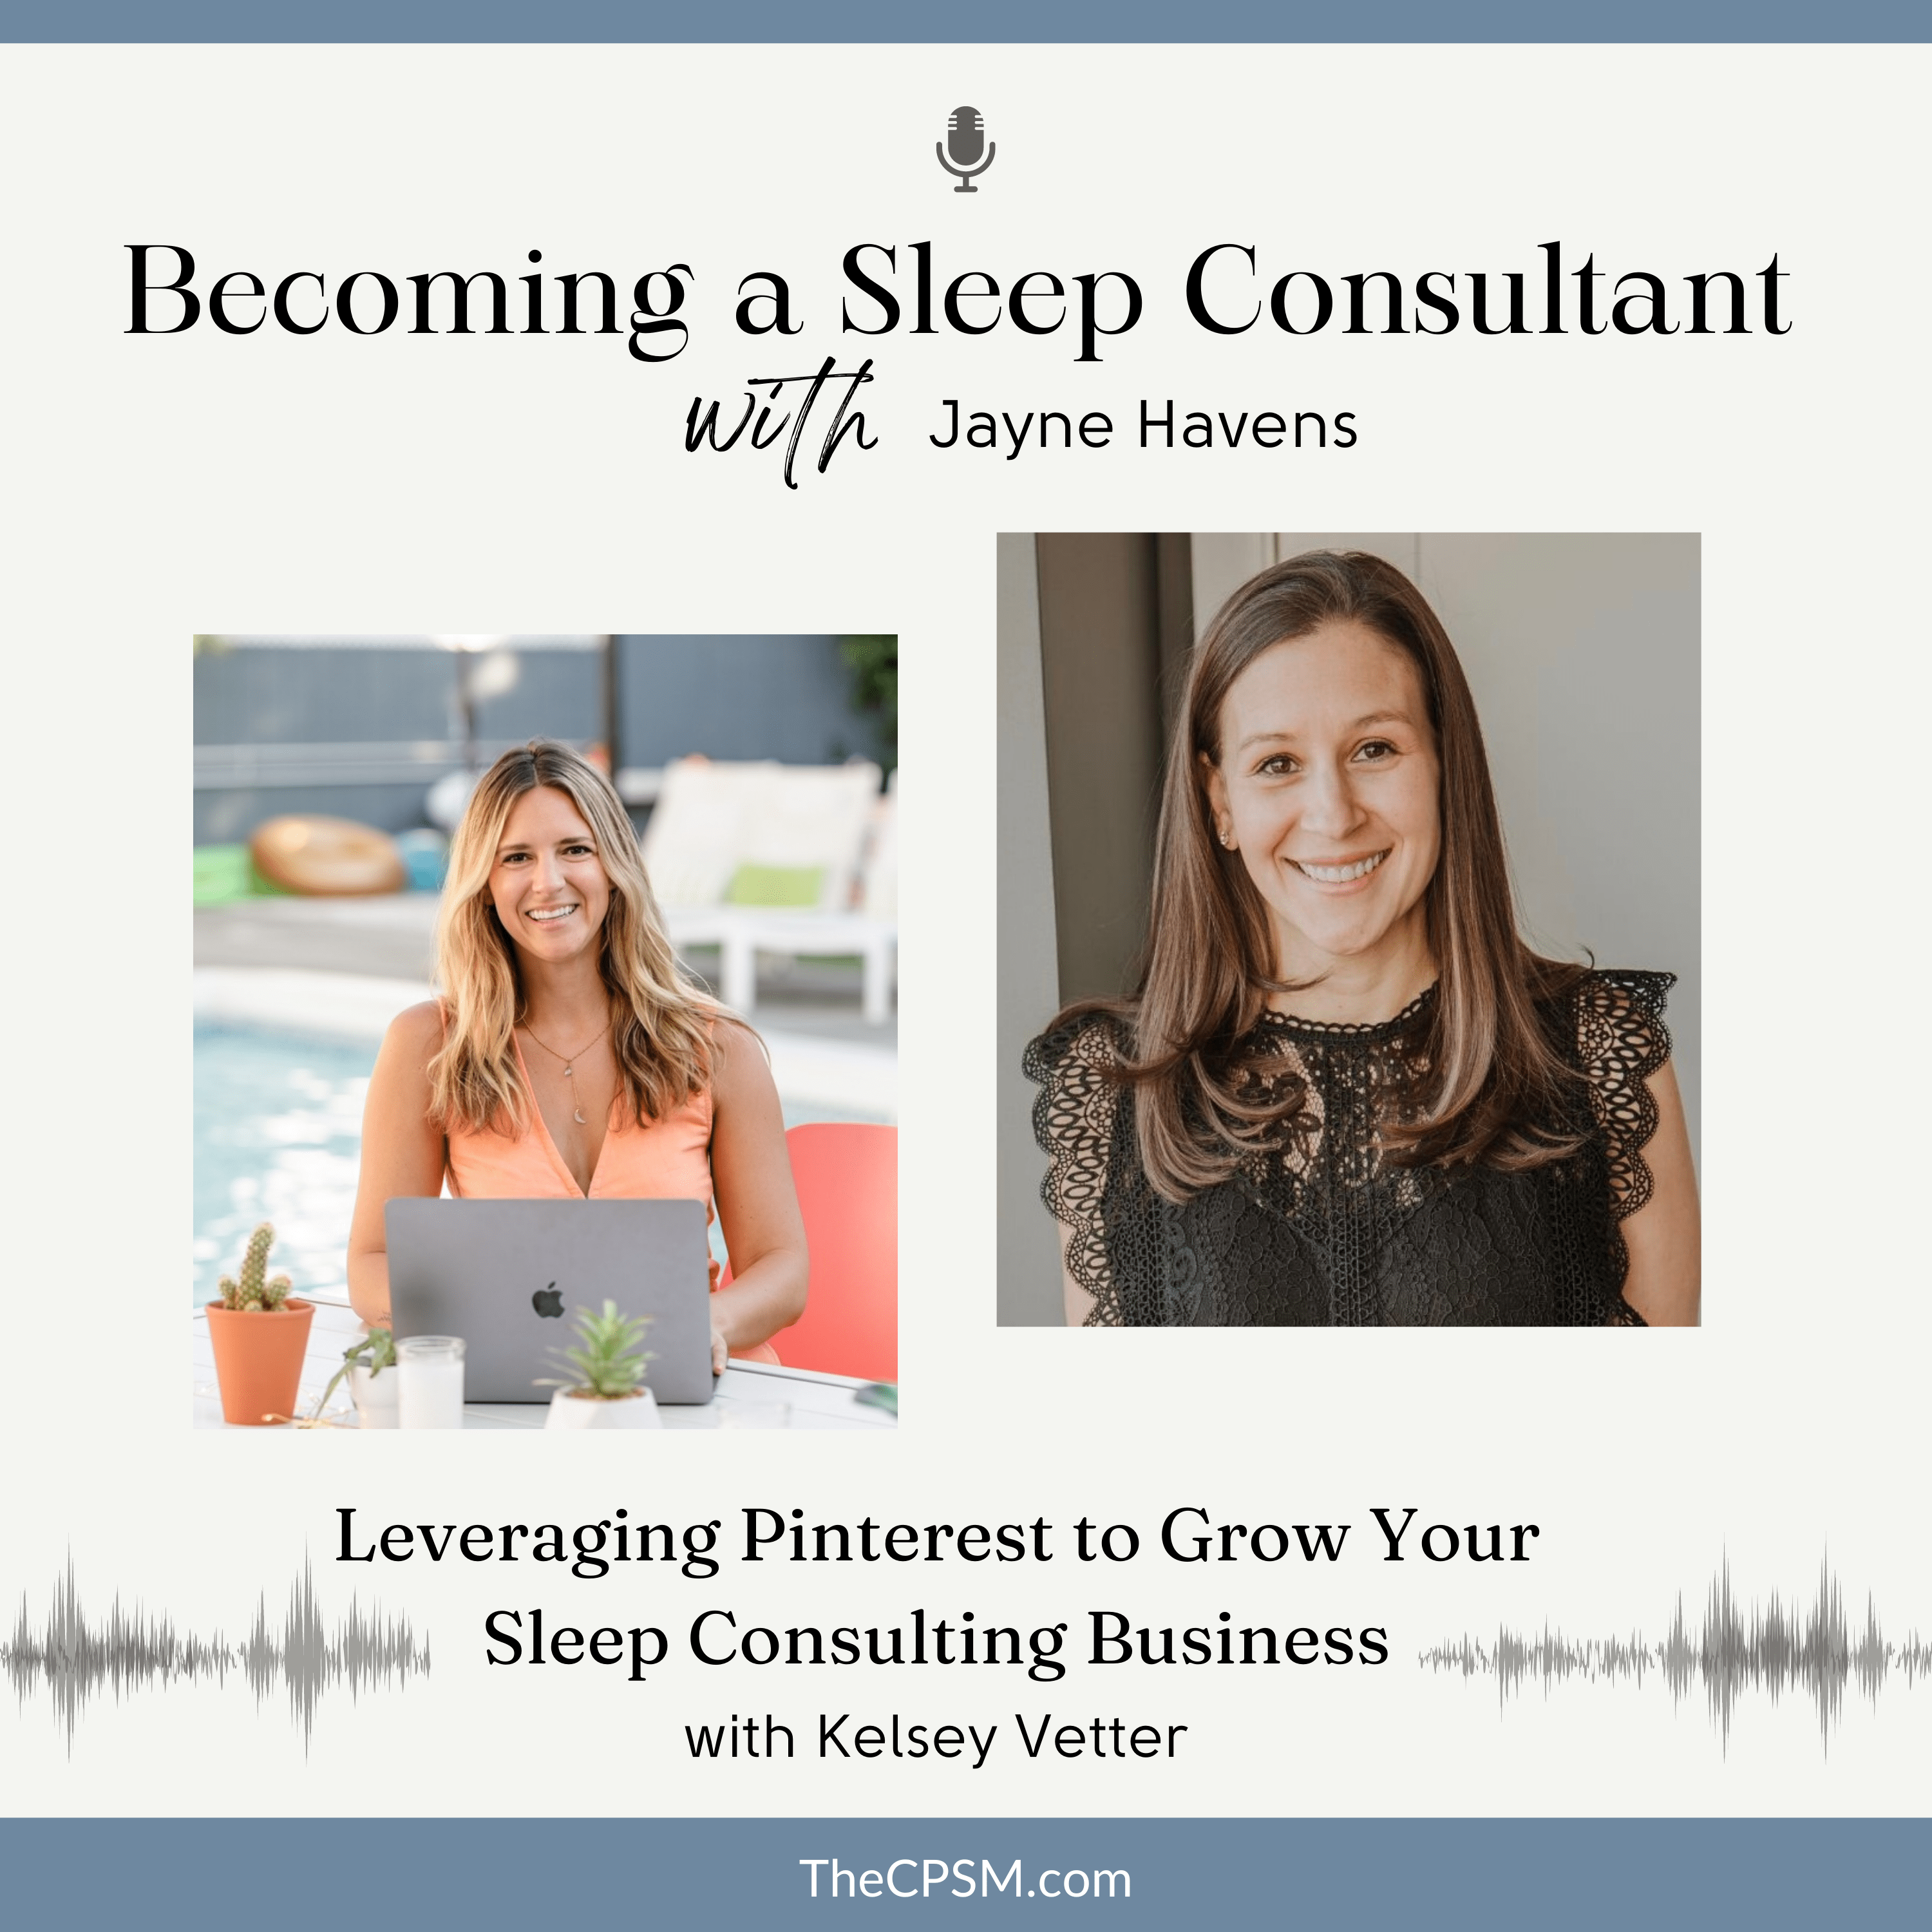 Leveraging Pinterest to Grow your Sleep Consulting Business